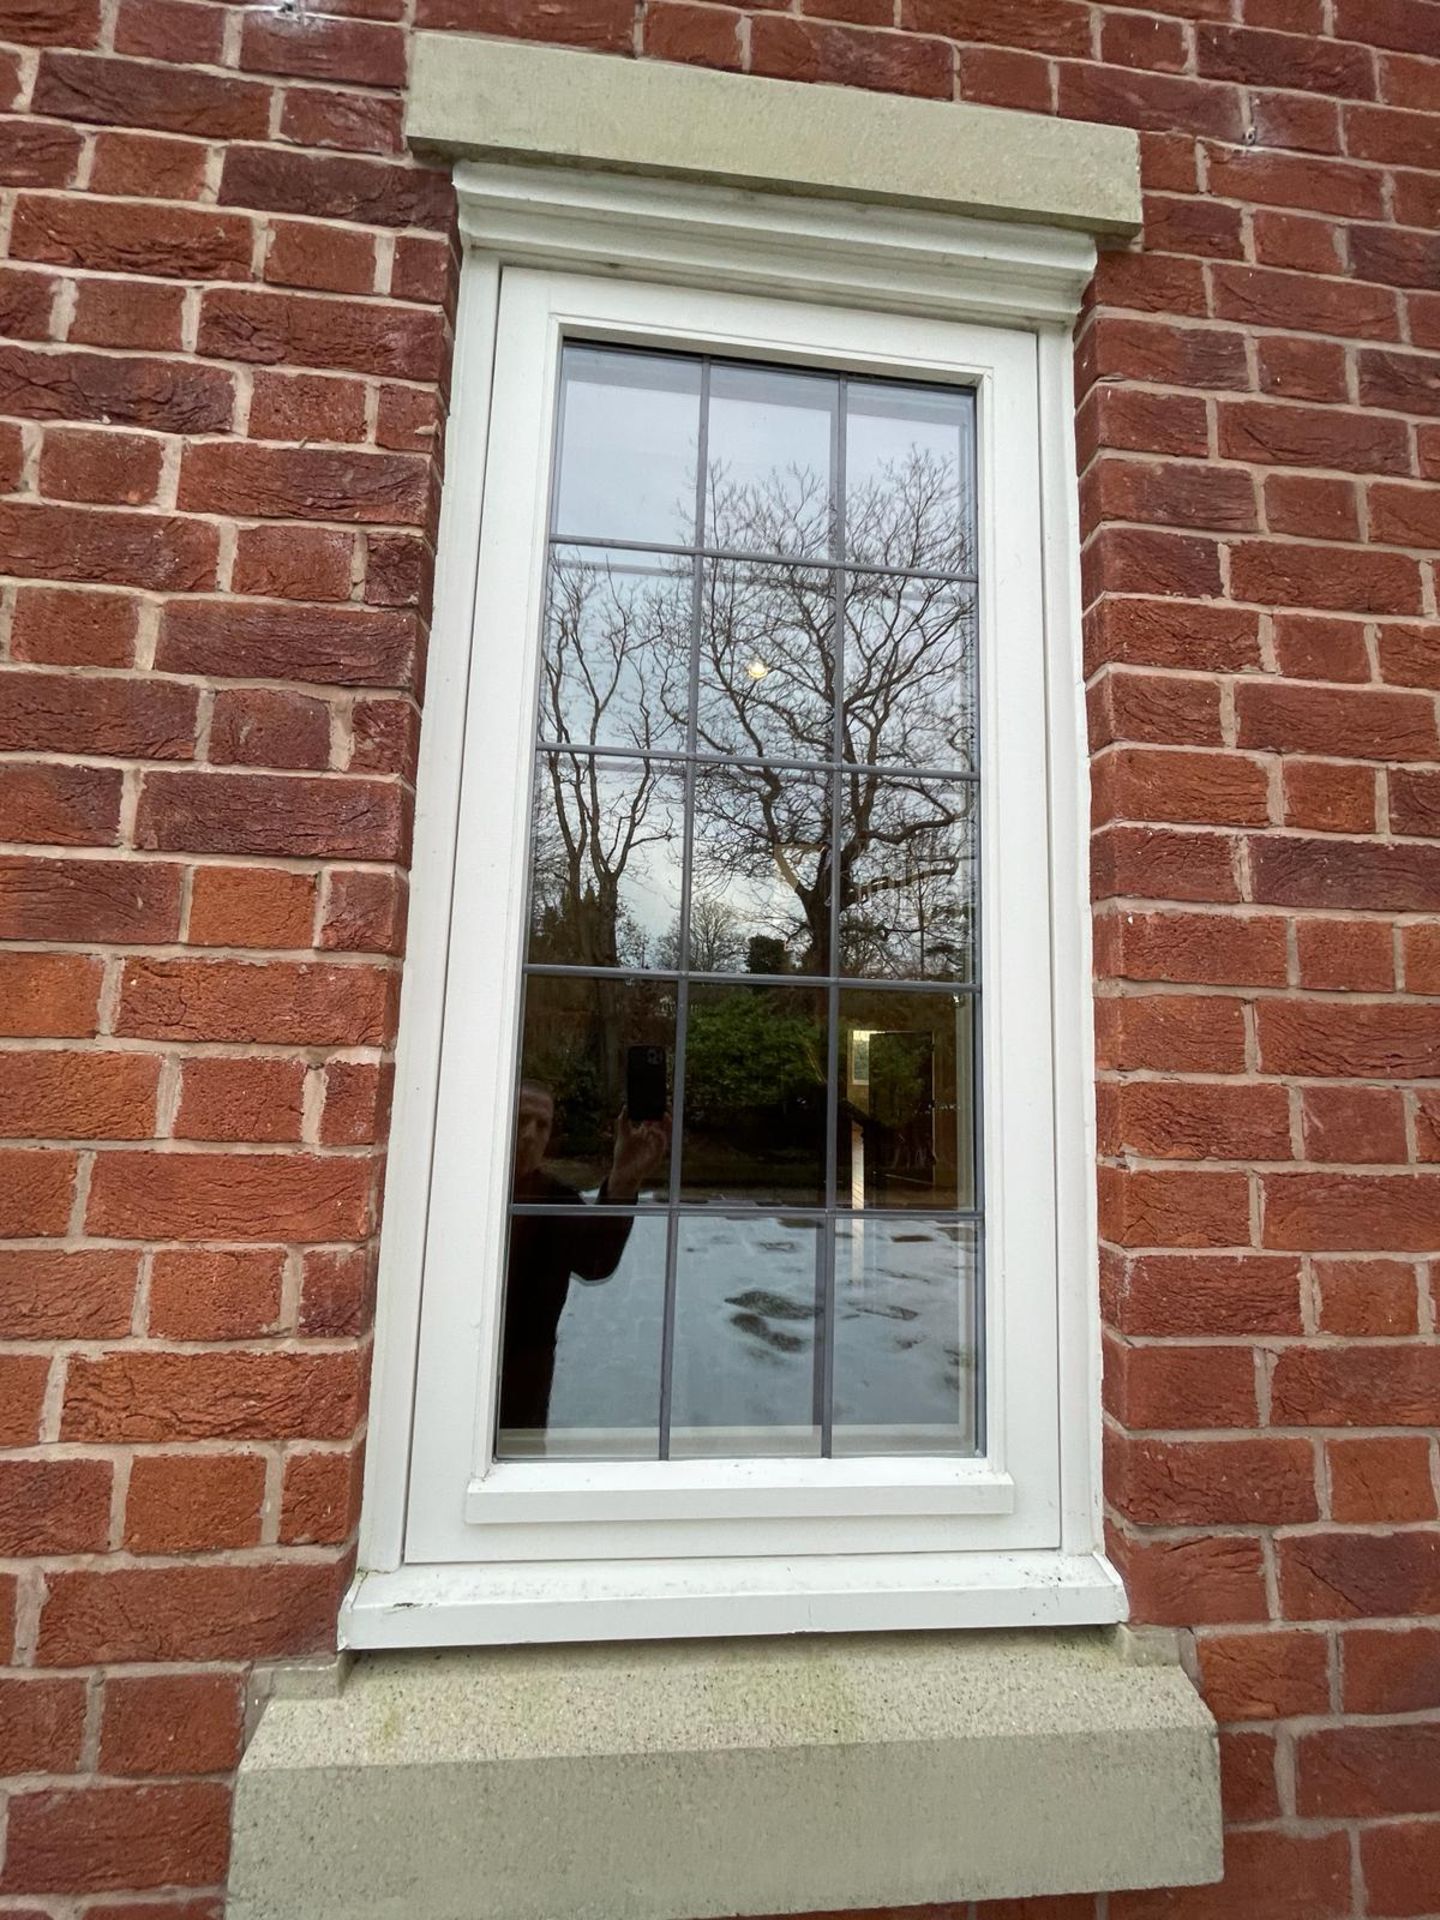 1 x Hardwood Timber Double Glazed & Leaded Window Frame - Ref: PAN147 / M-HALL - CL896 - NO VAT - Image 11 of 18